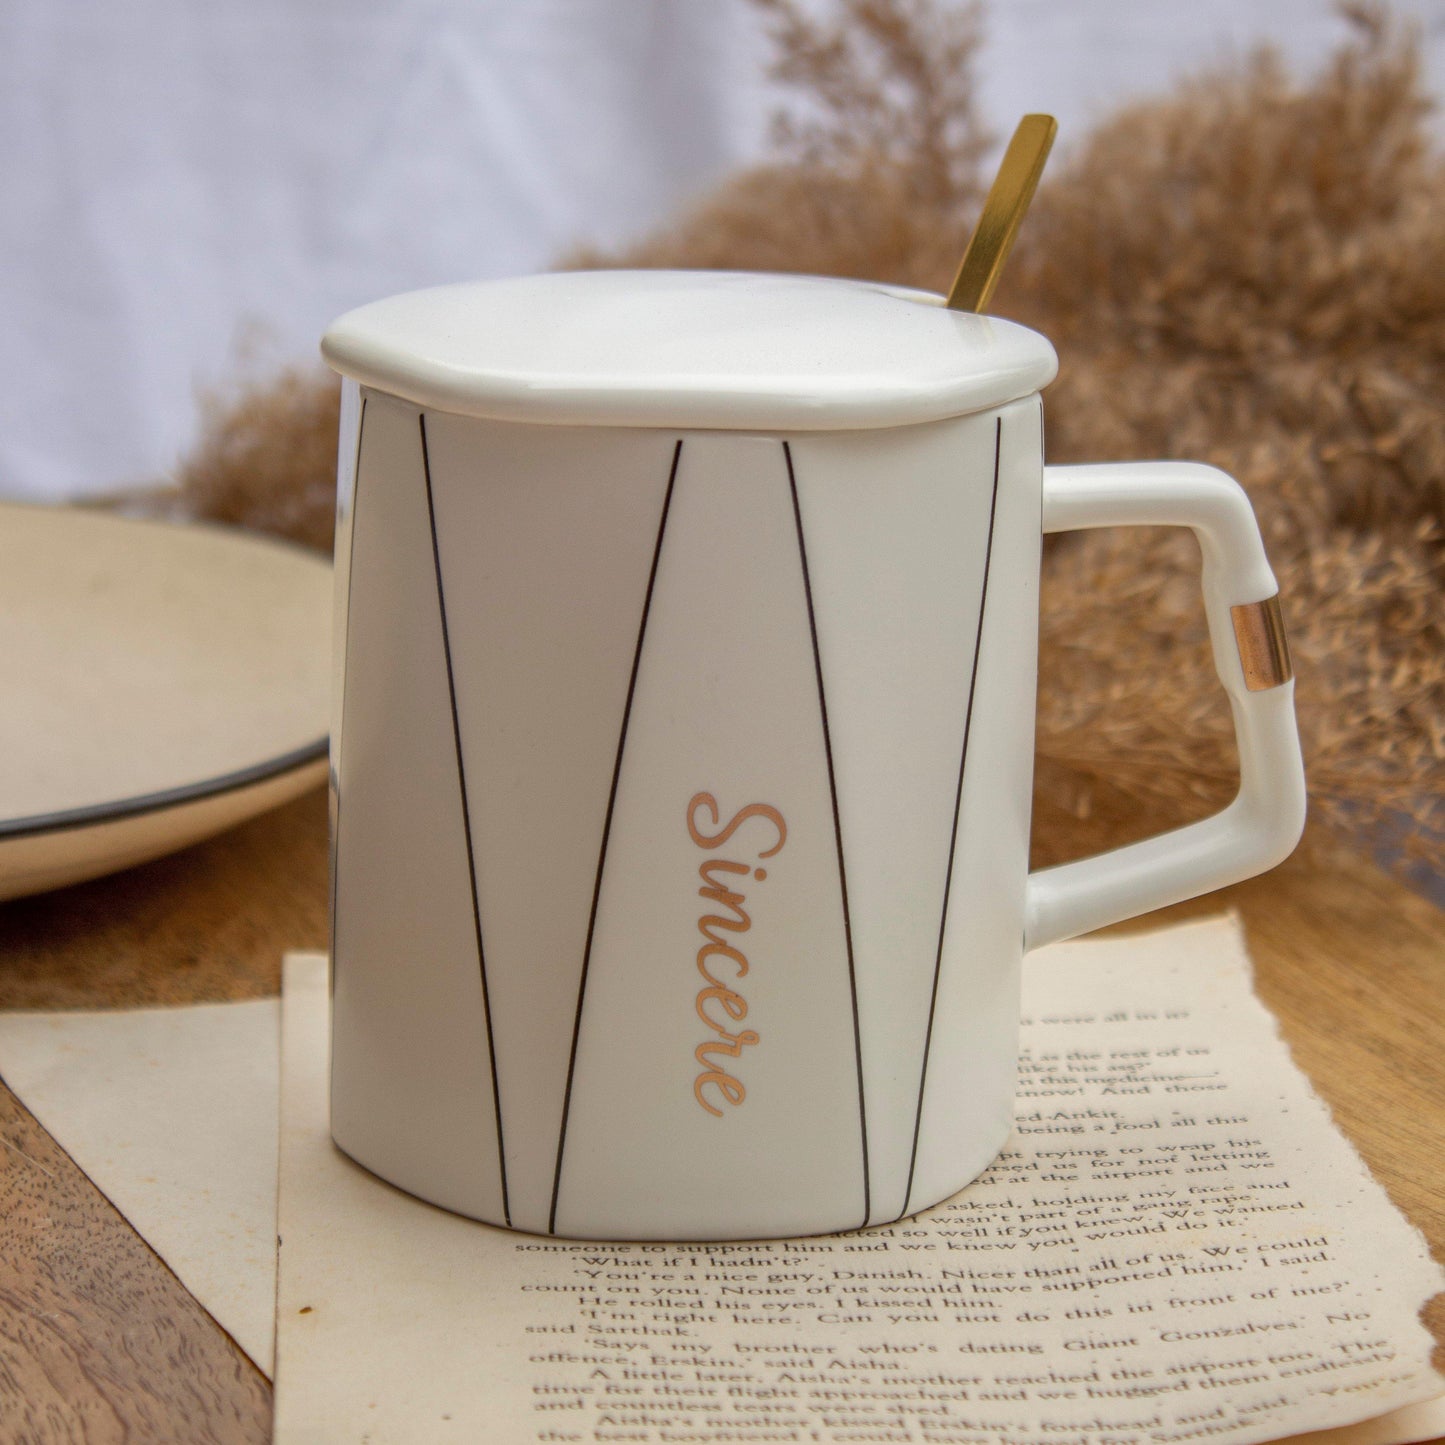 Classic Mug with Lid and Gold Spoon - The Umbrella store